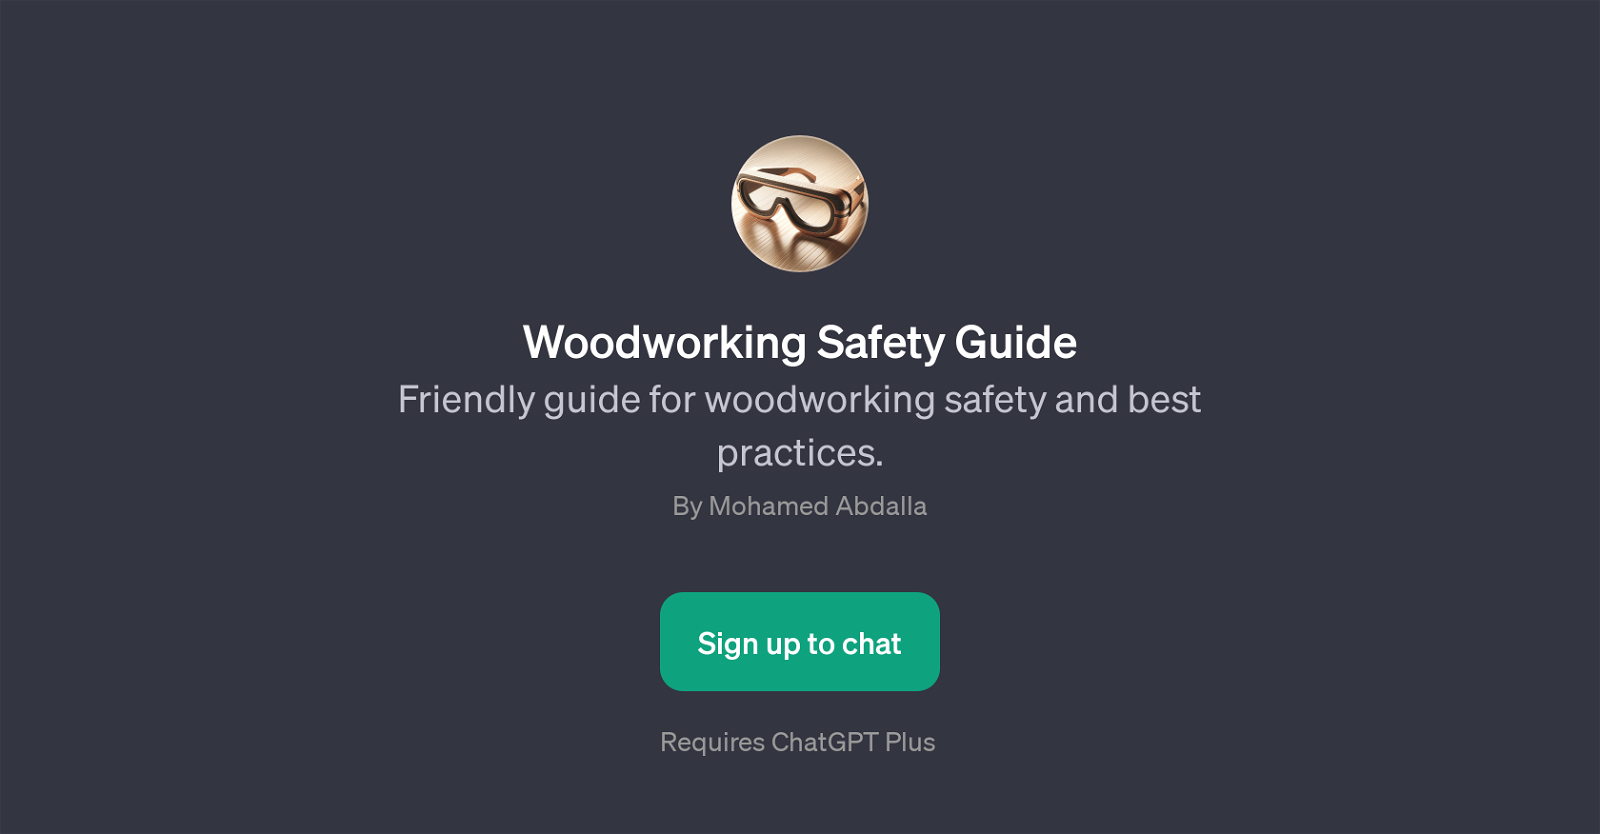 Woodworking Safety Guide website